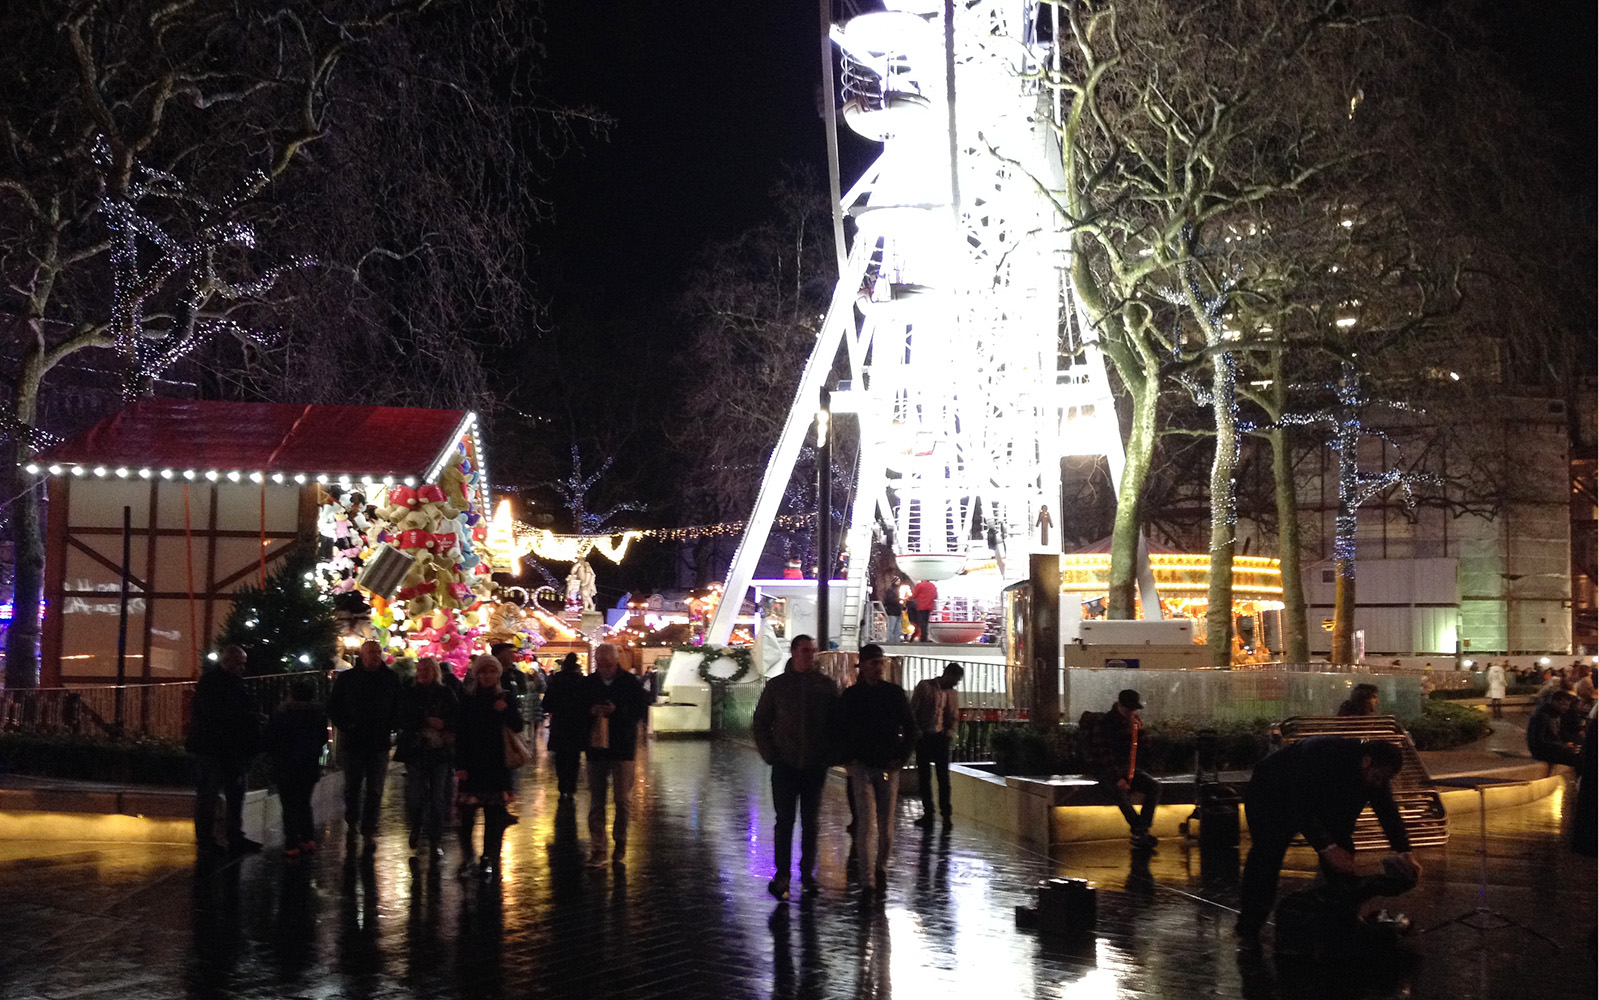 Leicester Square 3 January 2016